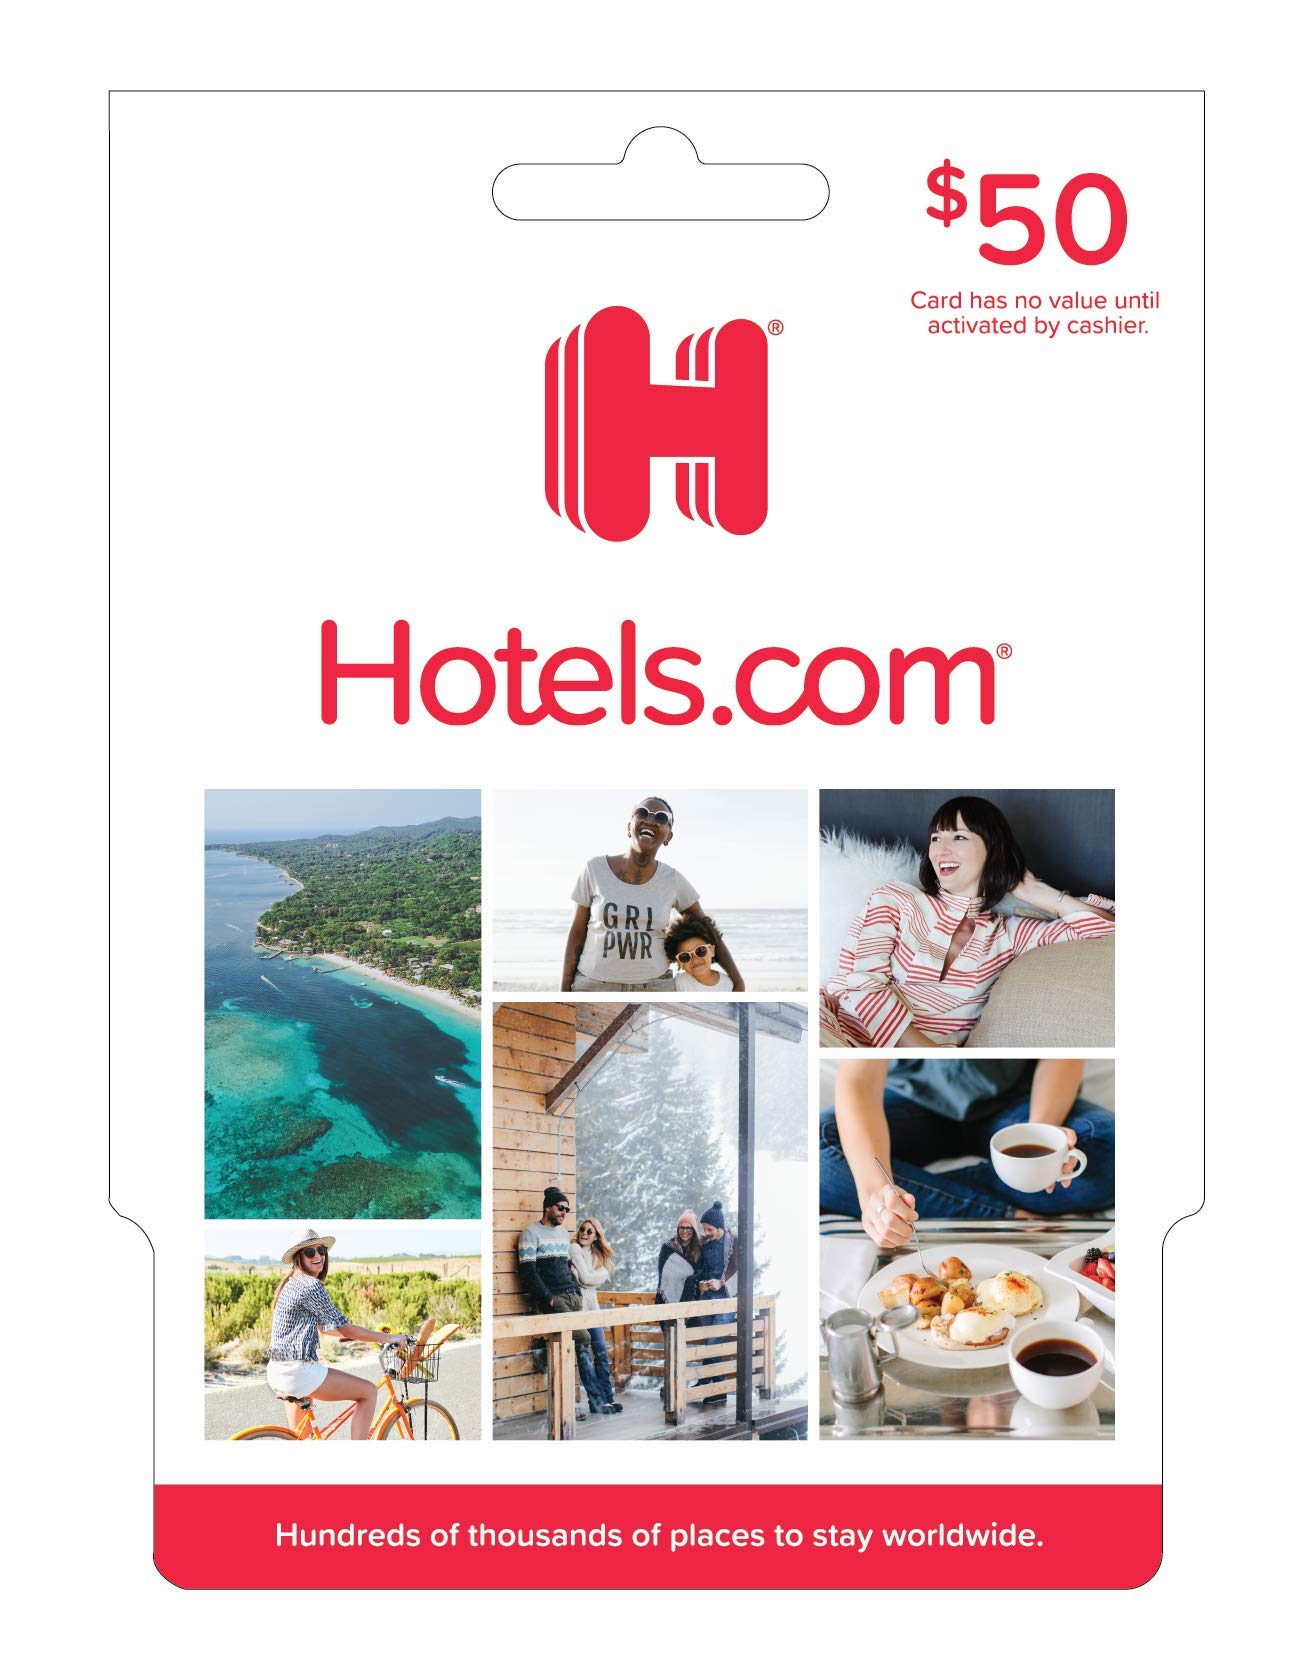 Why Should You Buy Yourself A Hotels.com Gift Card?